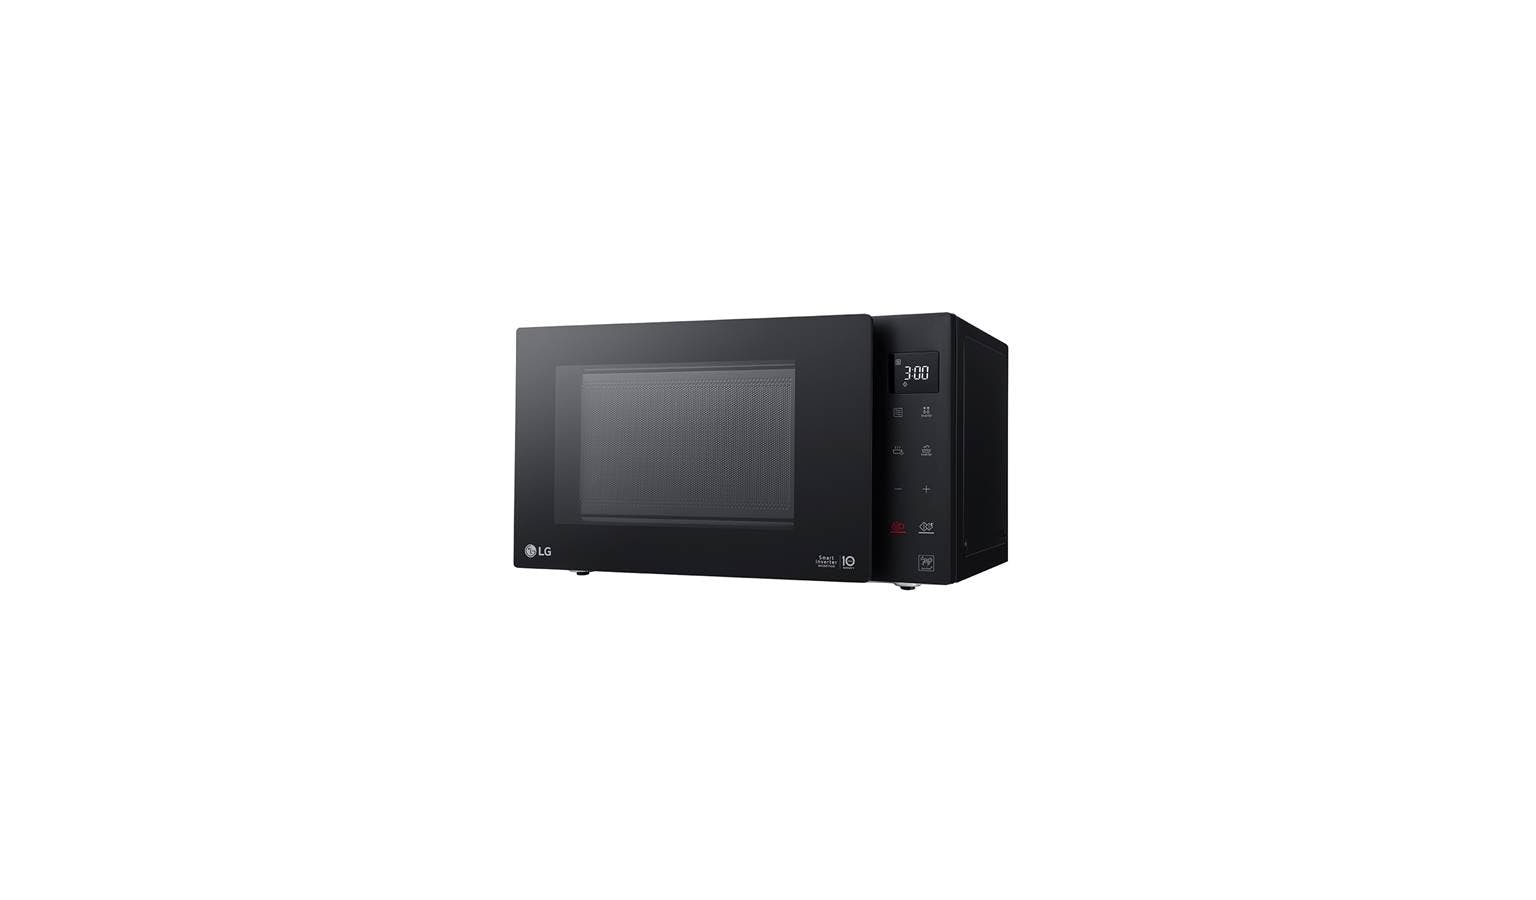 https://hnsgsfp.imgix.net/4/images/detailed/68/MS2336GIB_microwave-ovens_Z03.jpg?fit=fill&bg=0FFF&w=1536&h=900&auto=format,compress